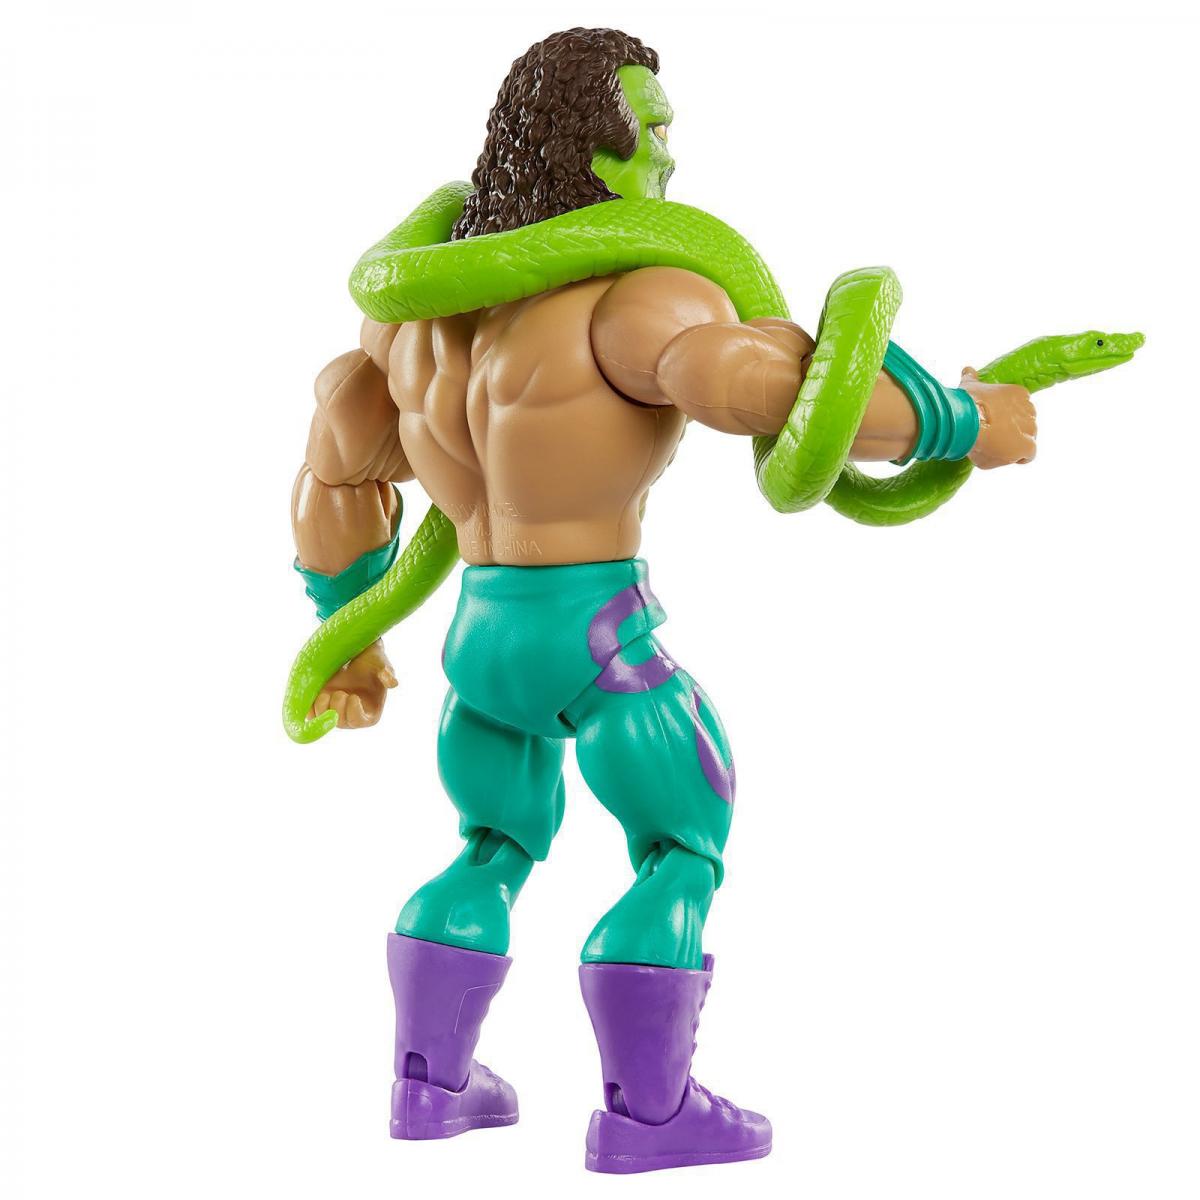 2020 Mattel Masters of the WWE Universe Series 4 Jake "The Snake" Roberts [Exclusive]